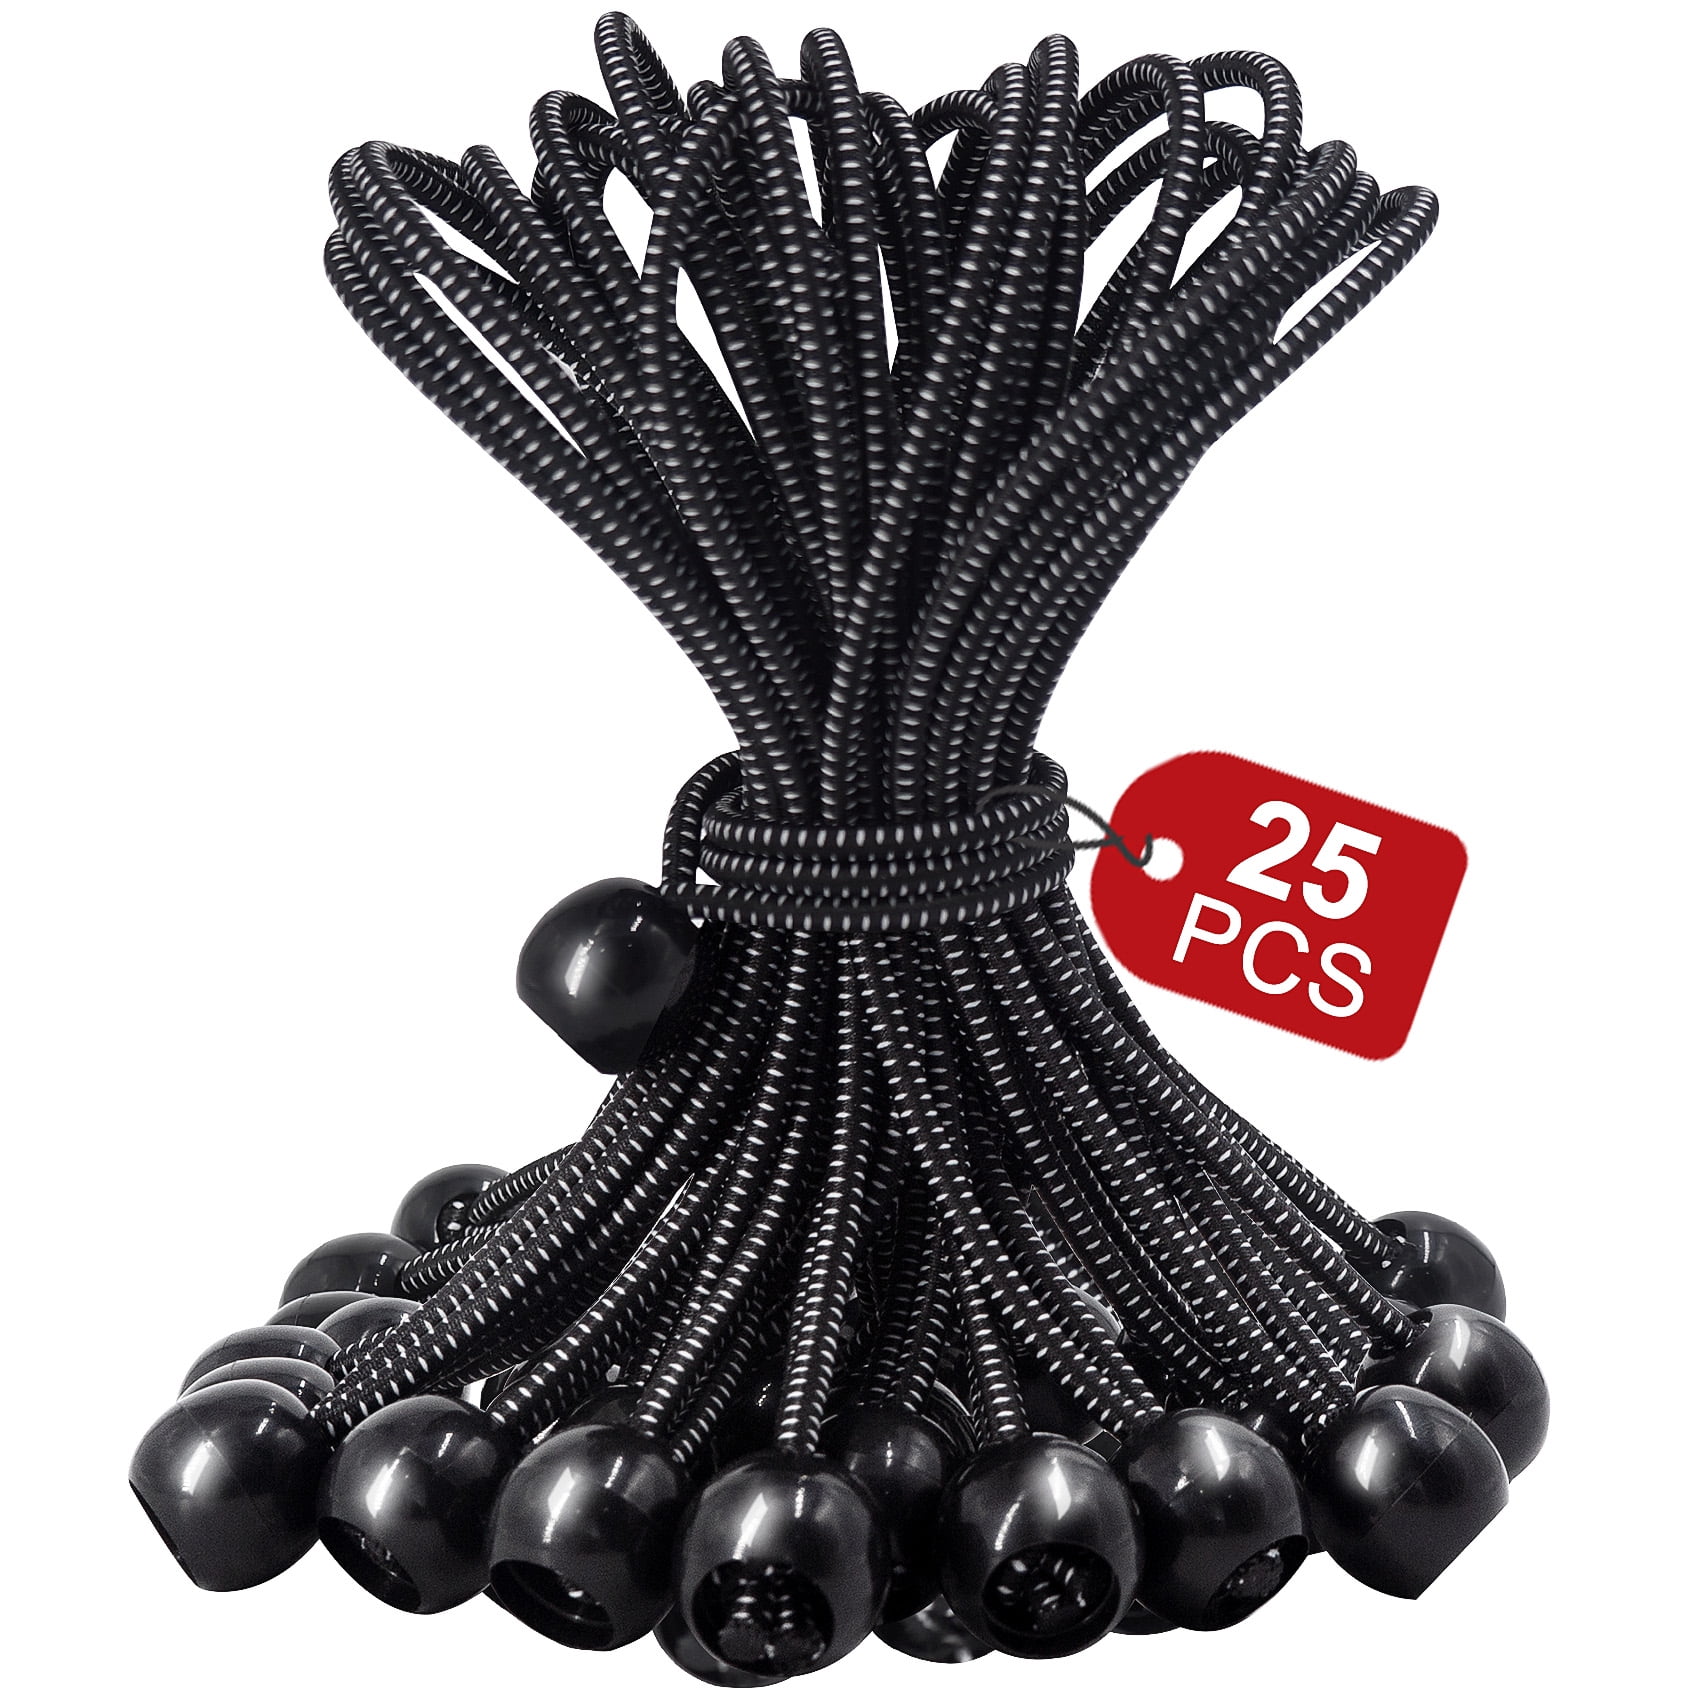 50PCS Ball Bungee Cords Heavy-Duty 4 Tarp Bungee with Balls